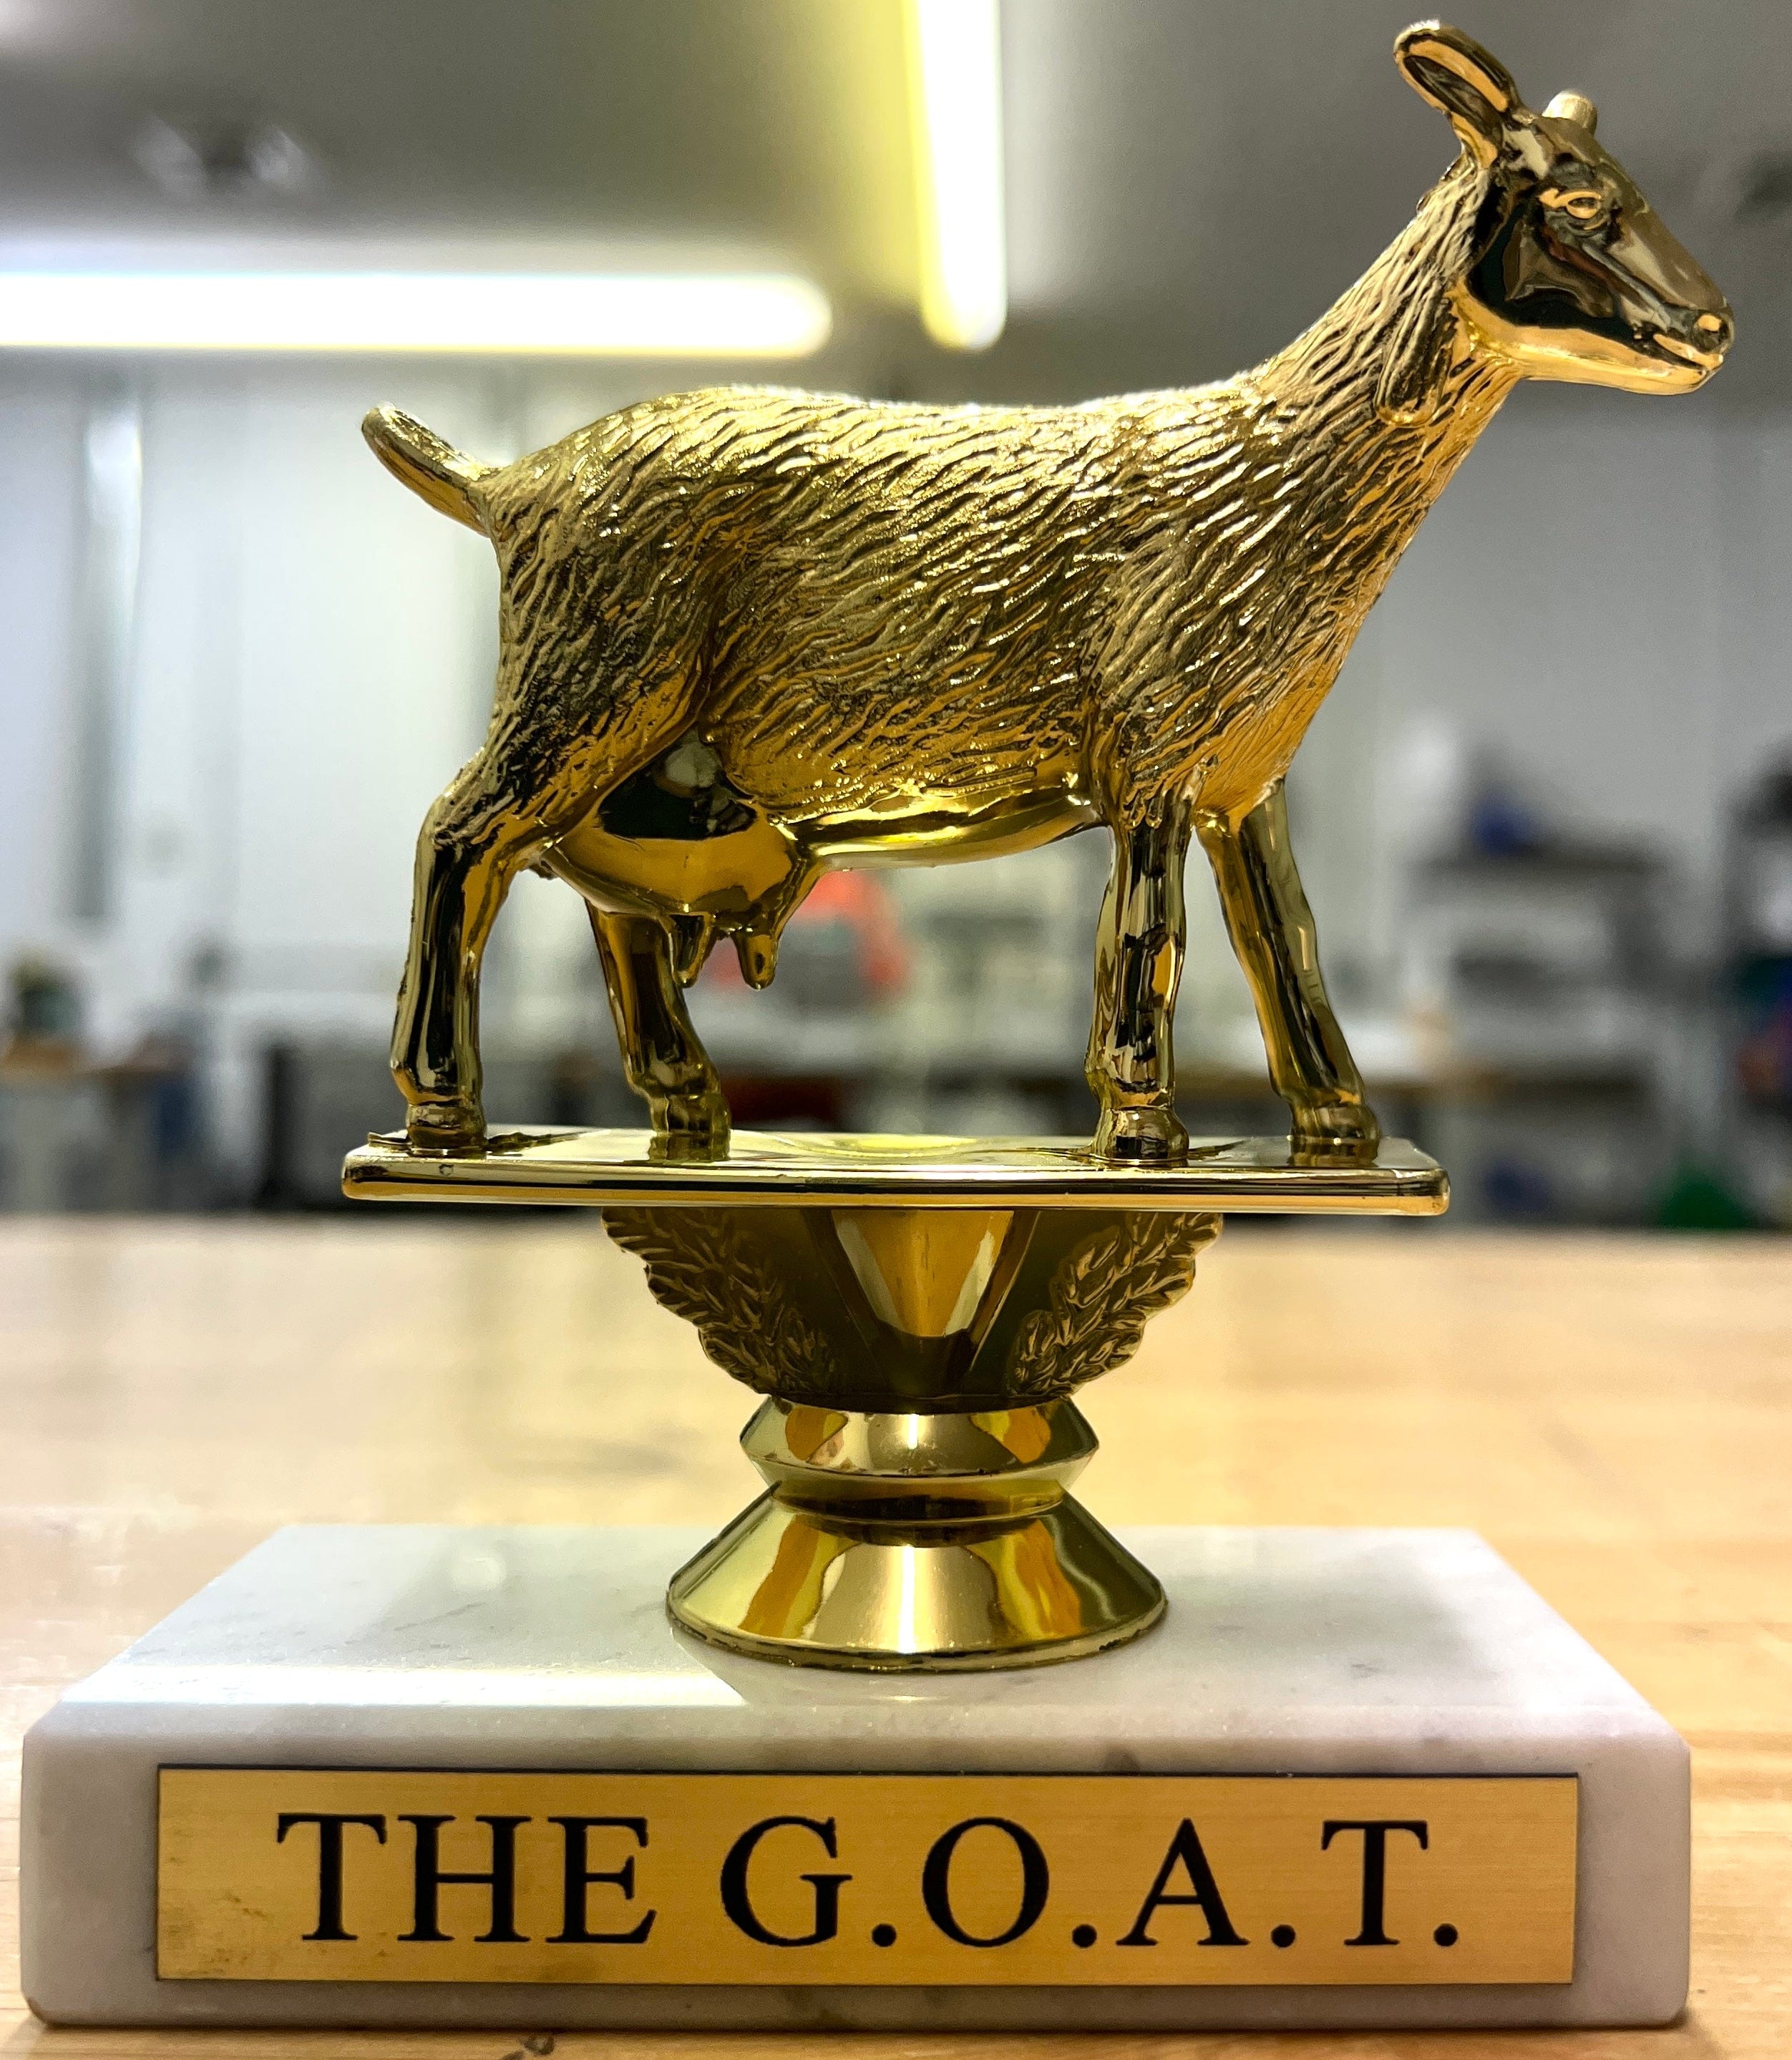 the-goat-trophy-g-o-a-t-greatest-of-all-time-trophy-with-marble-base-4-5-40230381387994.jpg